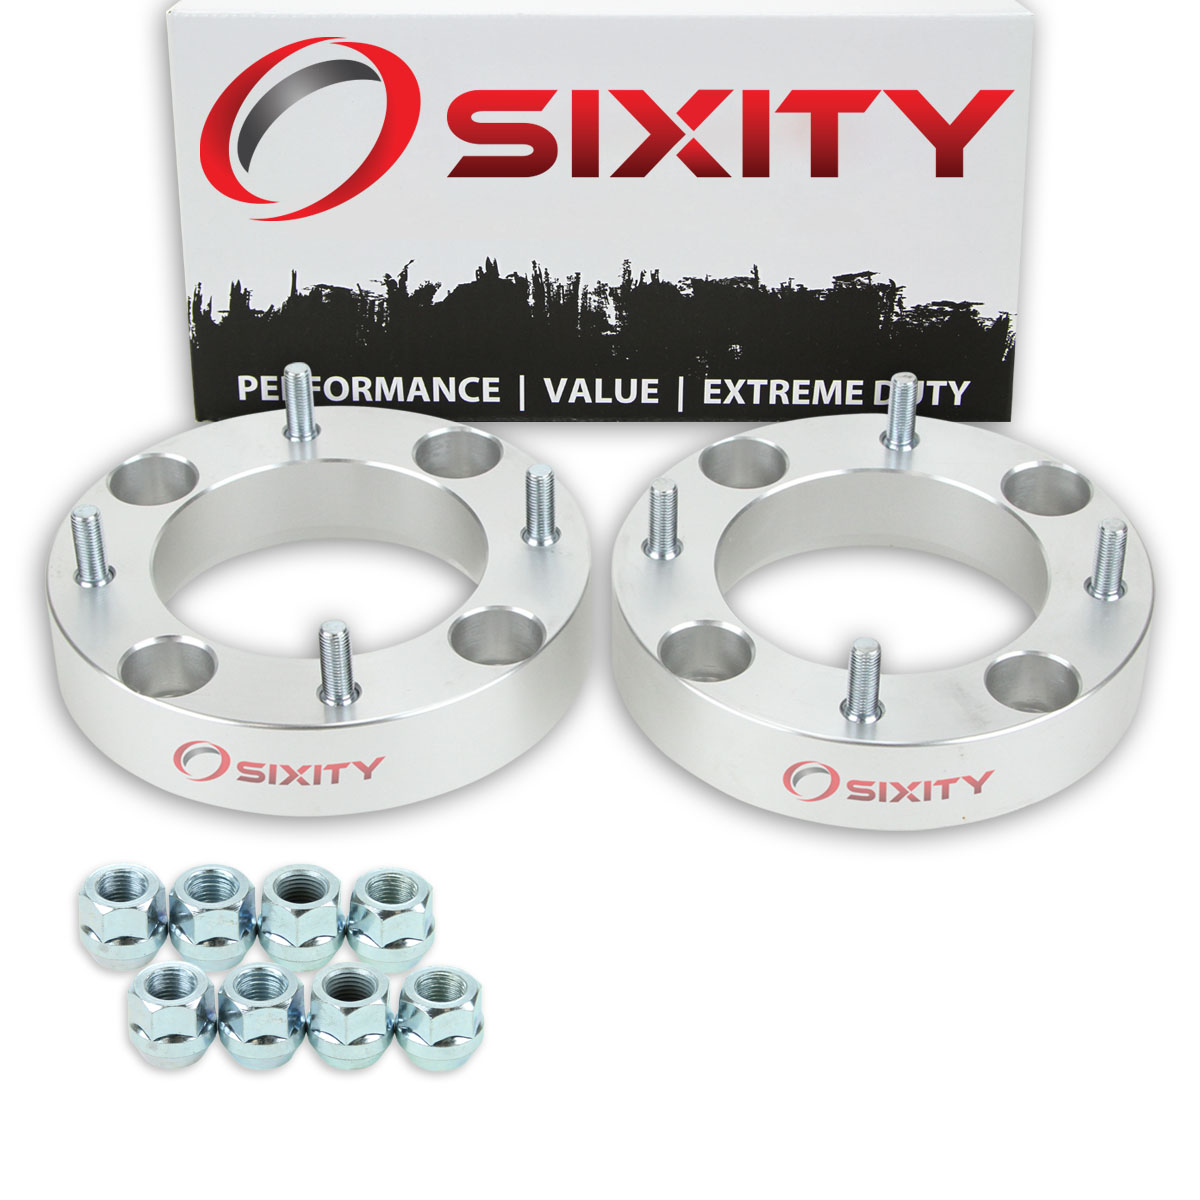 Sixity 2 pc 1.5 Inch Kawasaki V-Force KFX 700 4/144 Front Wheel Spacers